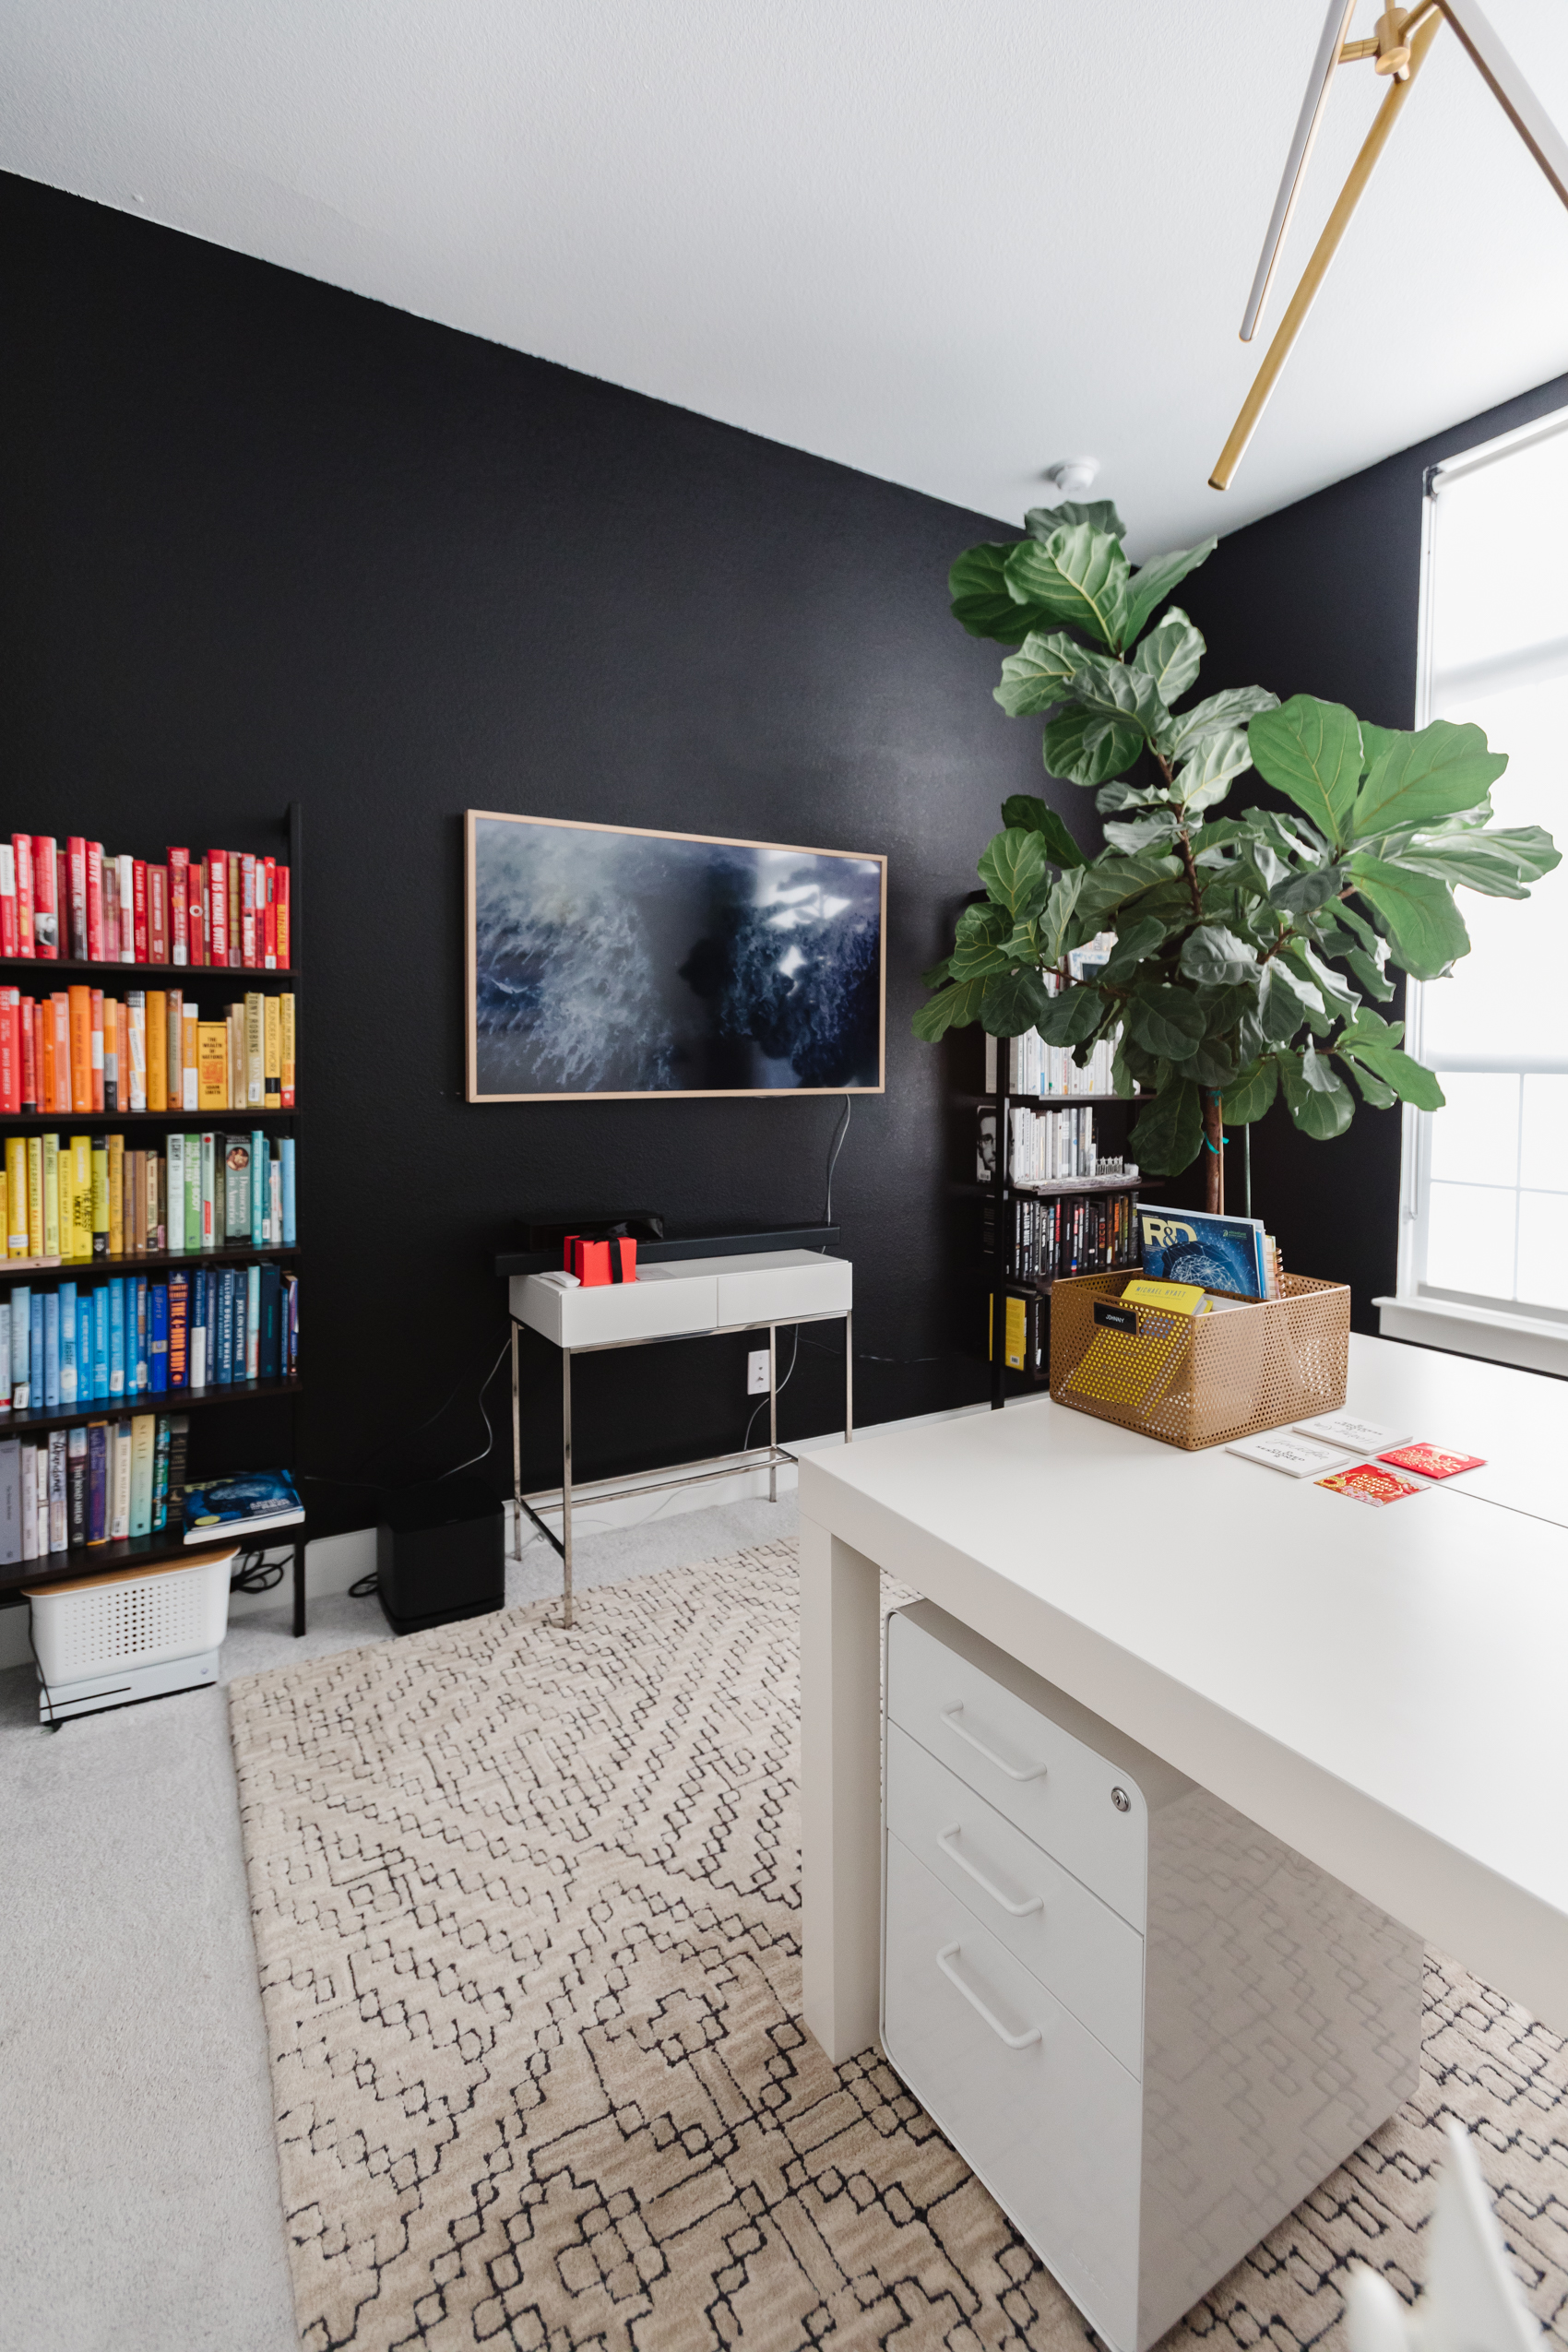 Blogger Hoang-Kim Cung discusses shared home office ideas in her transitional style home including a rainbow bookshelf with a black statement wall and samsung frame tv